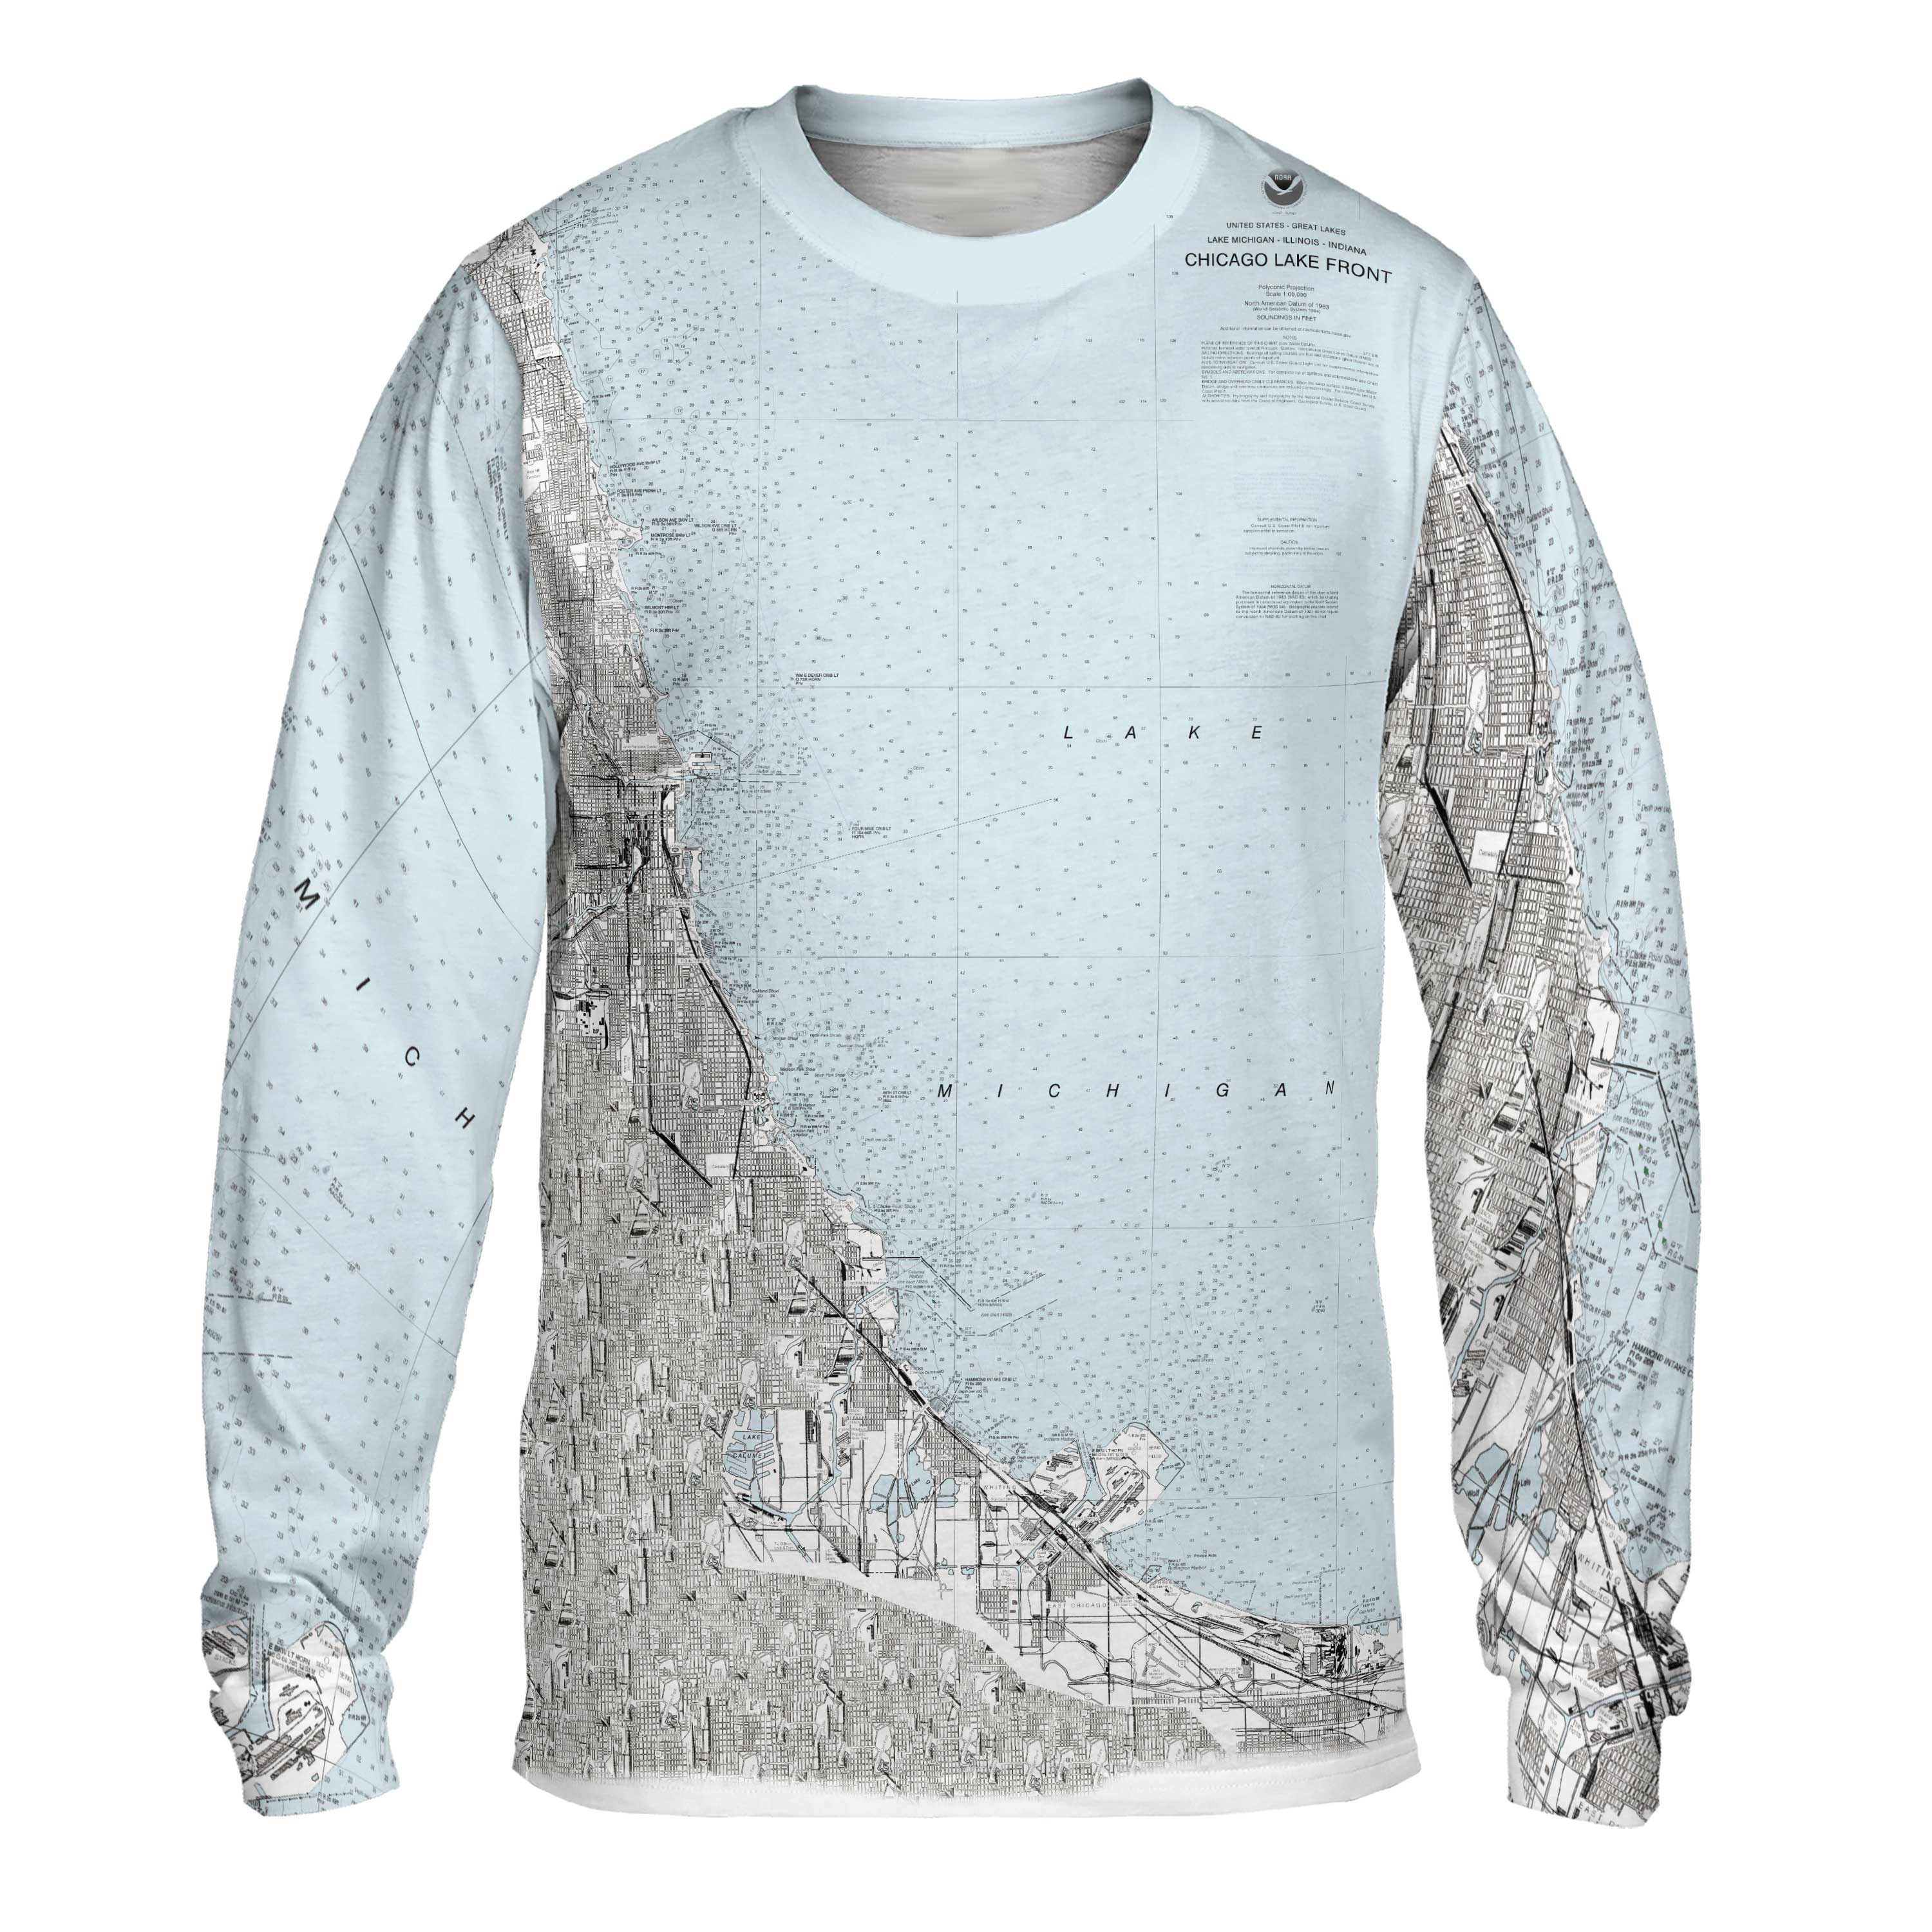 The Chicago Harbor Long Sleeve Tee